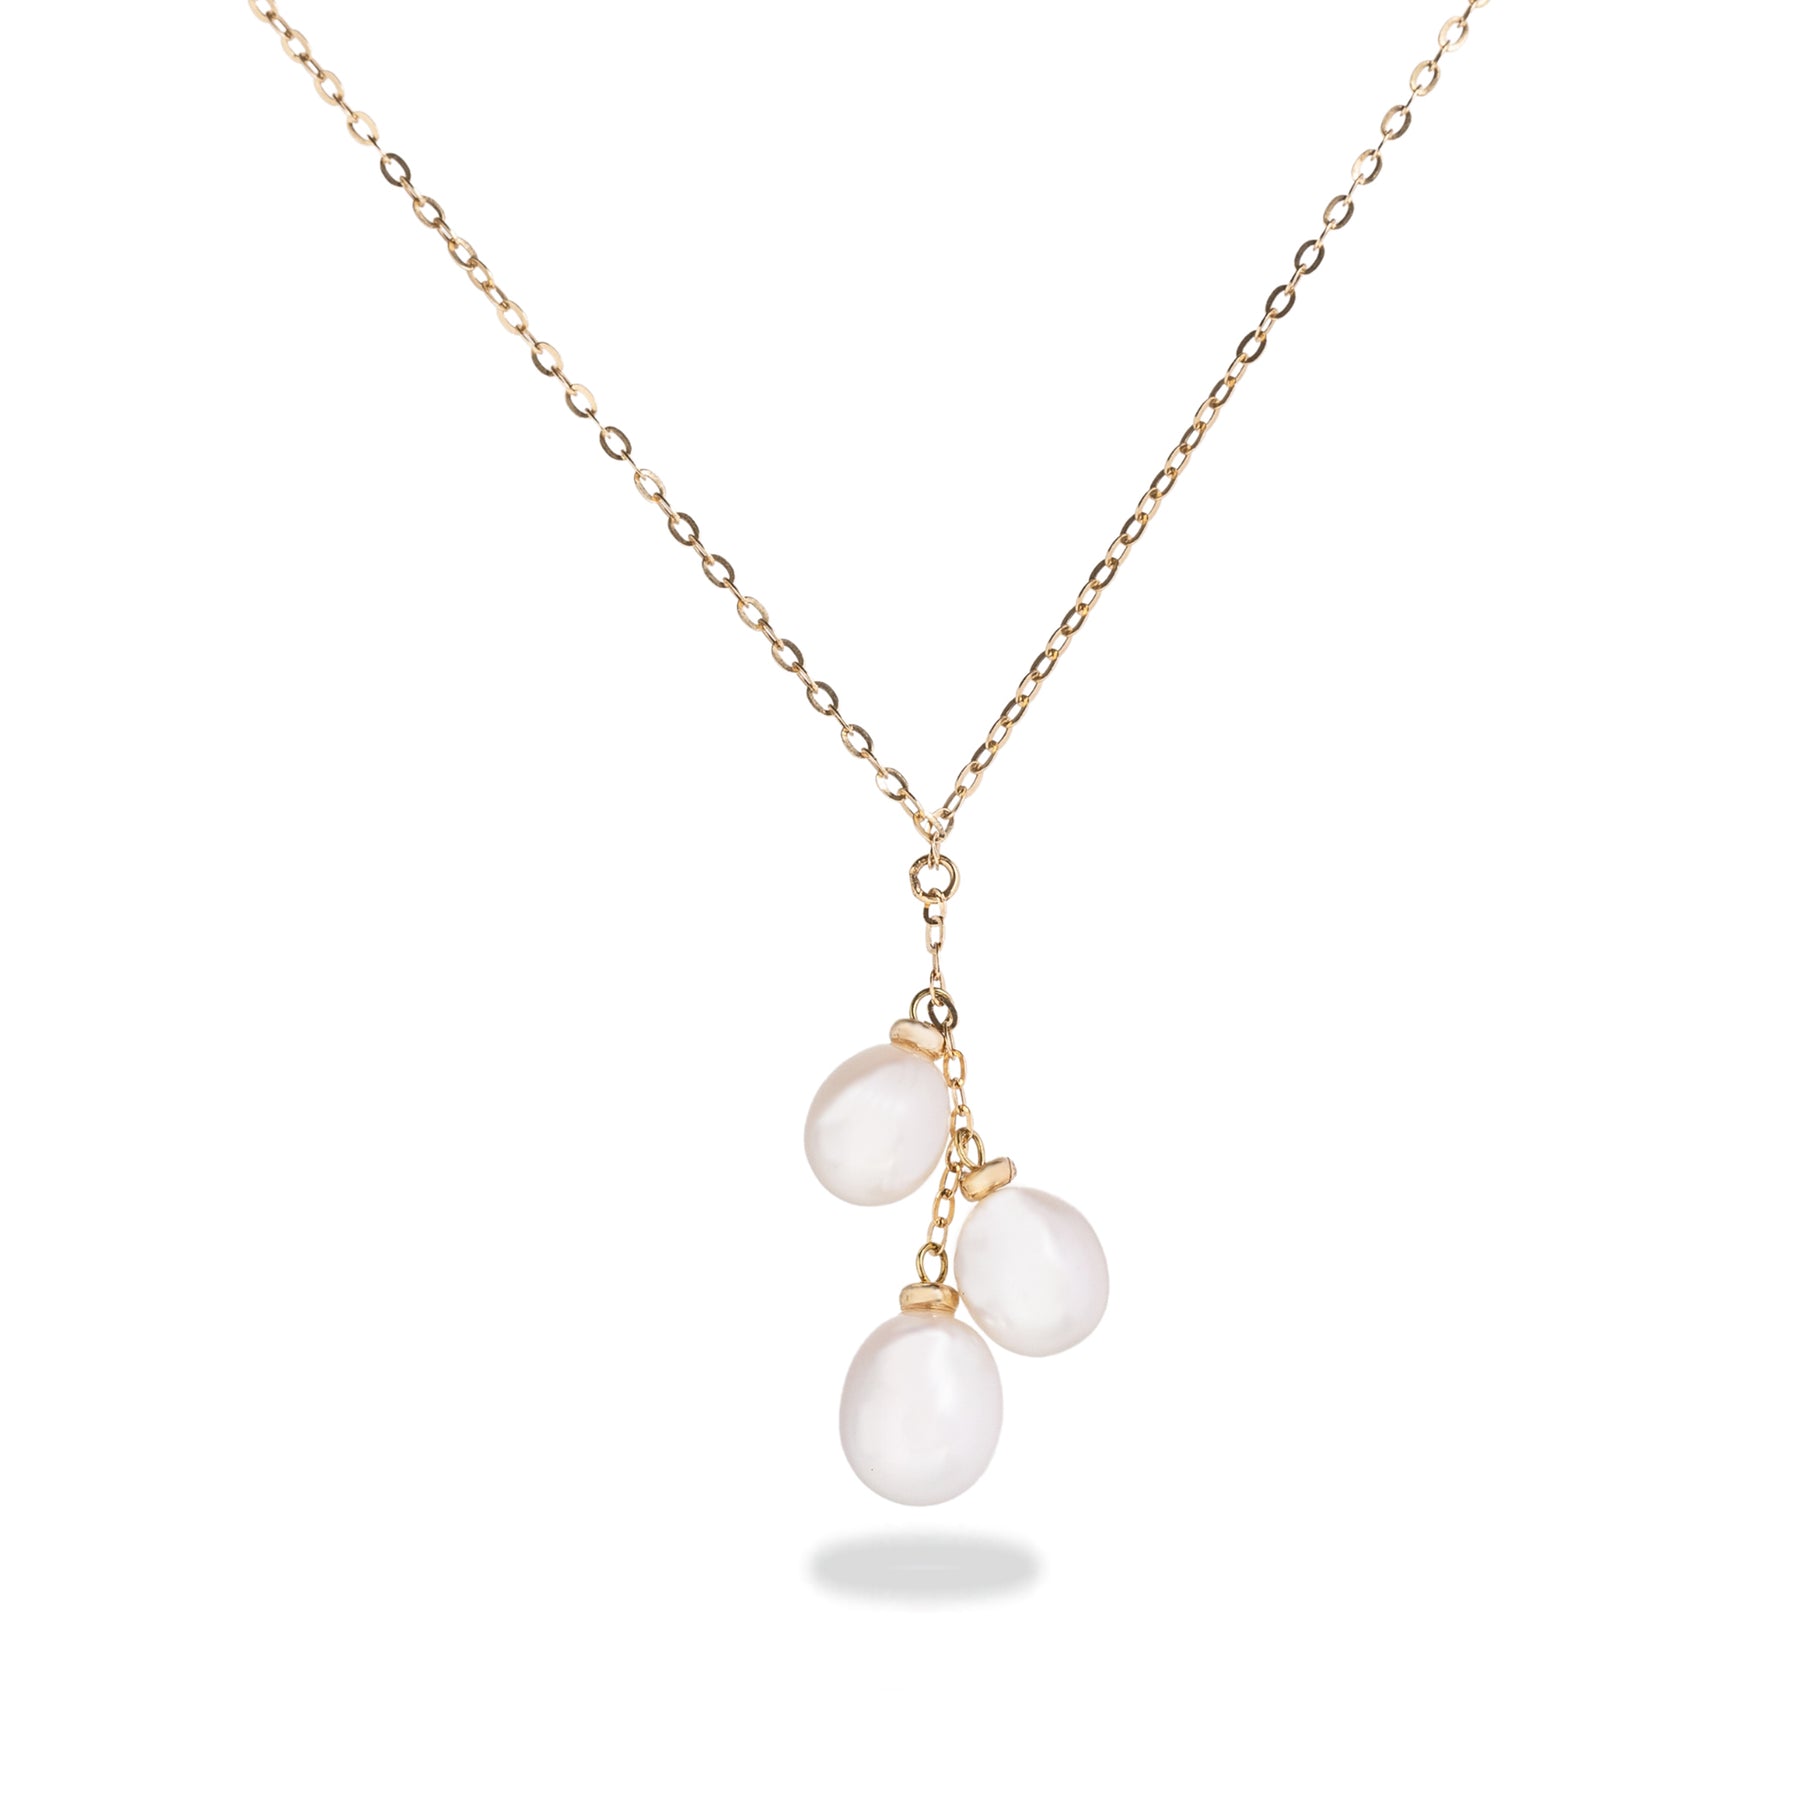 14k yellow gold triple pearl lariat drop necklace